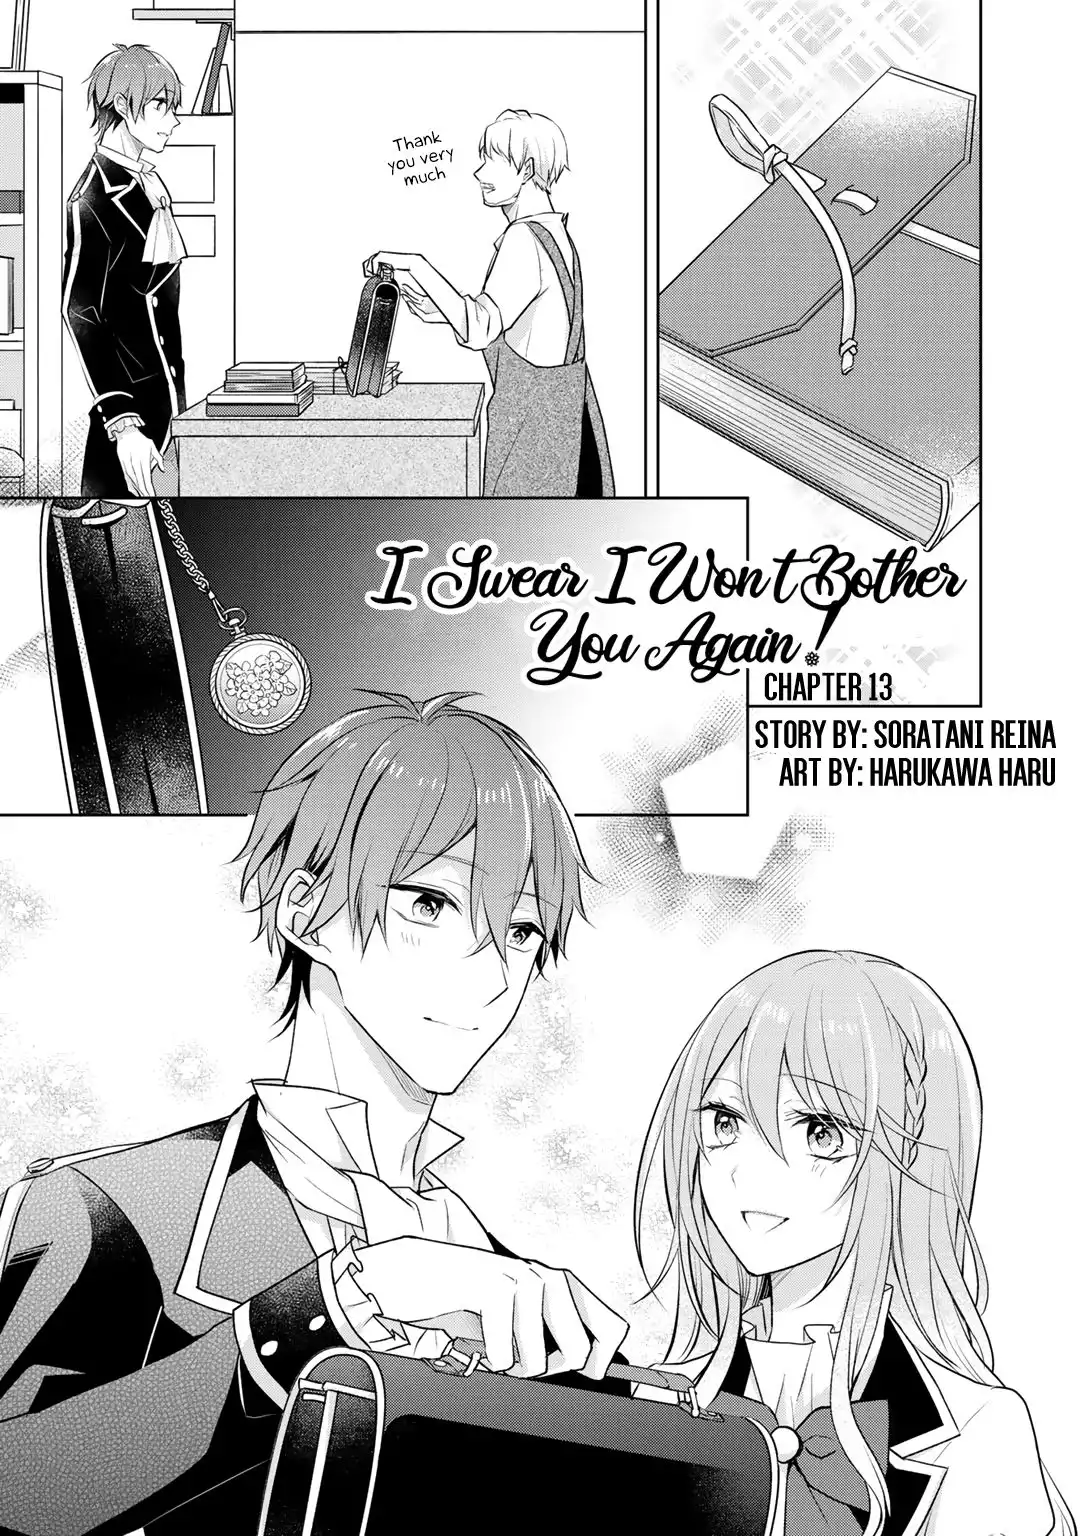 I Swear I Won't Bother You Again! Chapter 13